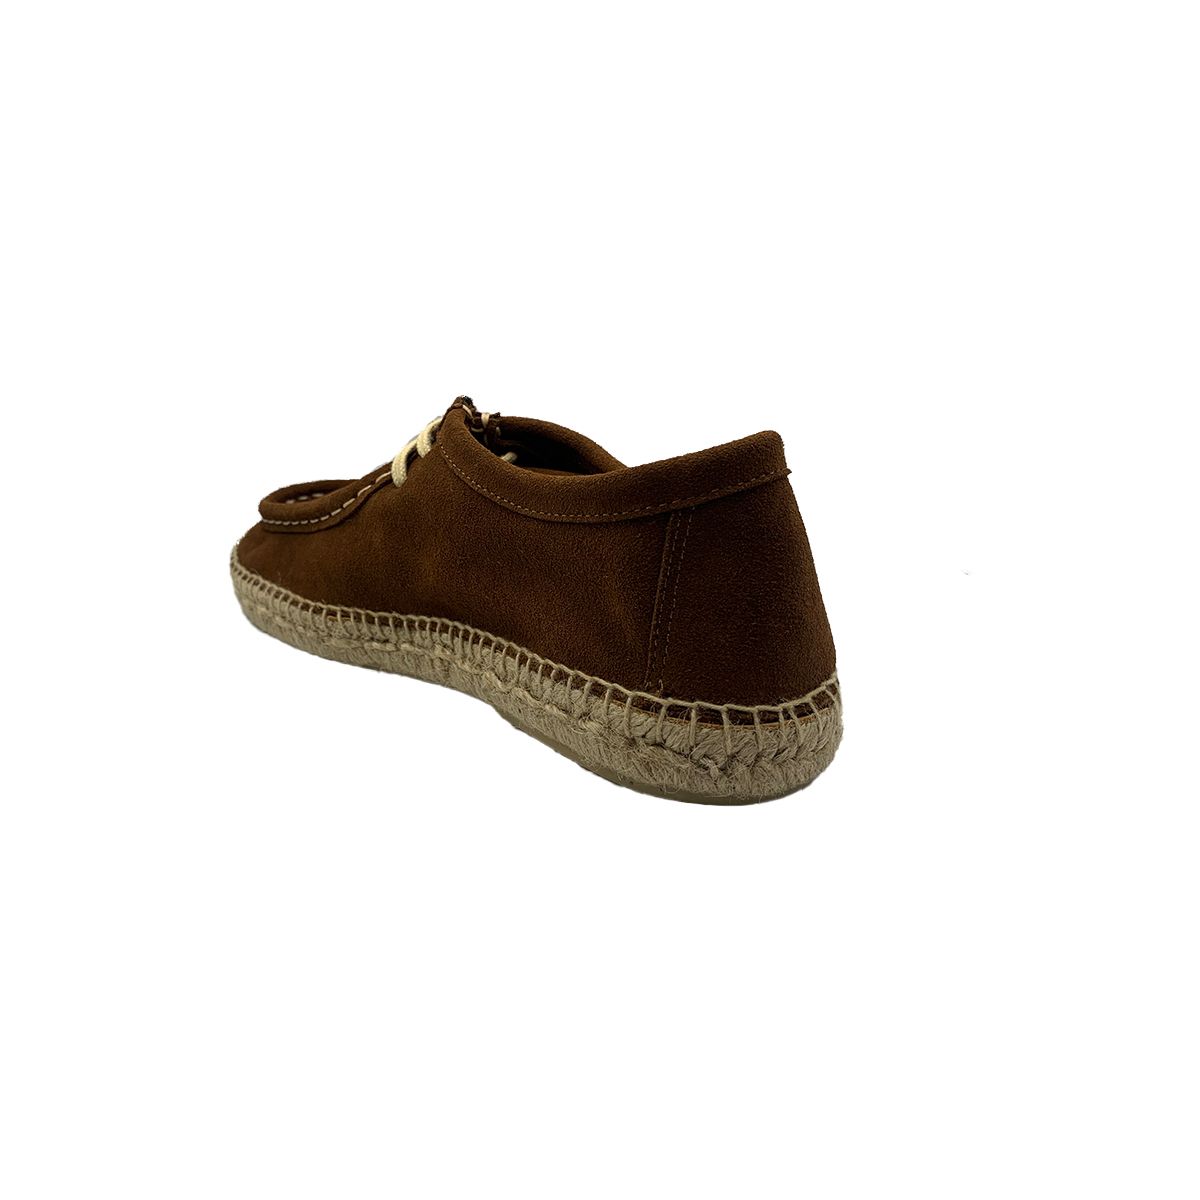 Wallabee Split Leather Loafers/Brown